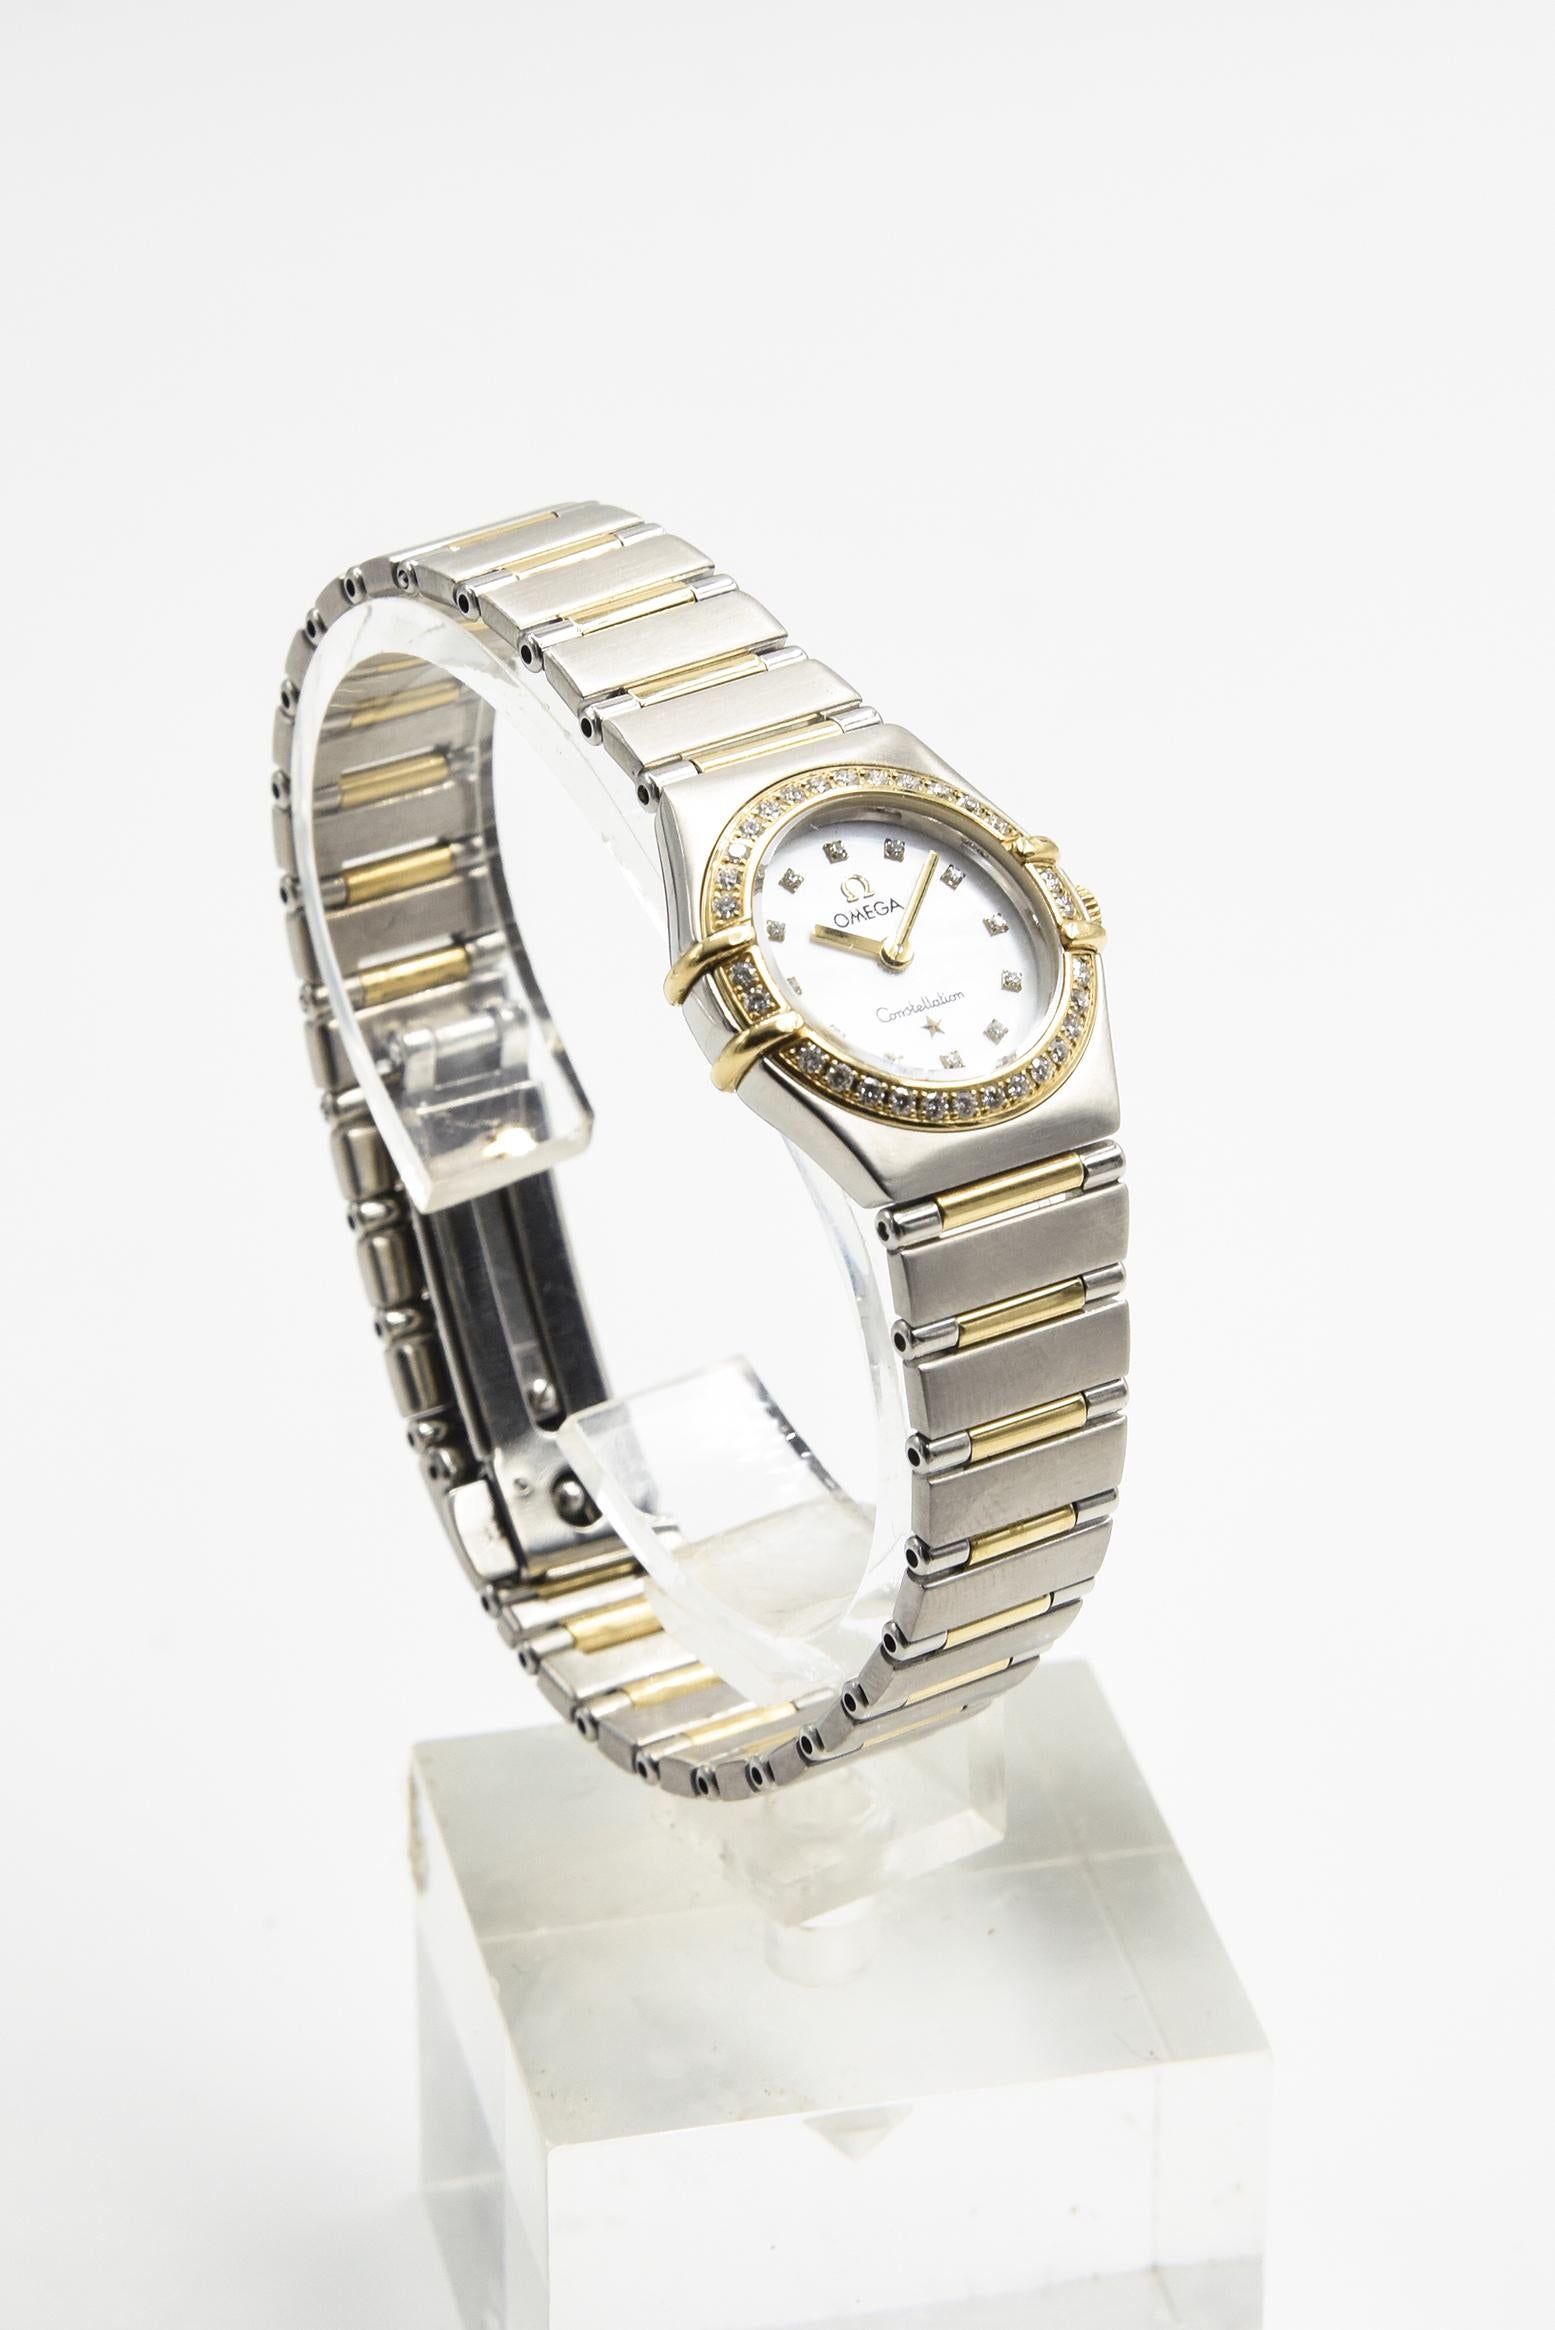 Omega Constellation My Choice Stainless Steel & 18k Gold Diamond Mini Watch 
The watch contains a quartz movement with a white mother of pearl dial and 12 diamond hour markers.  It has a new sapphire crystal.  Around the dial is an 18k yellow gold